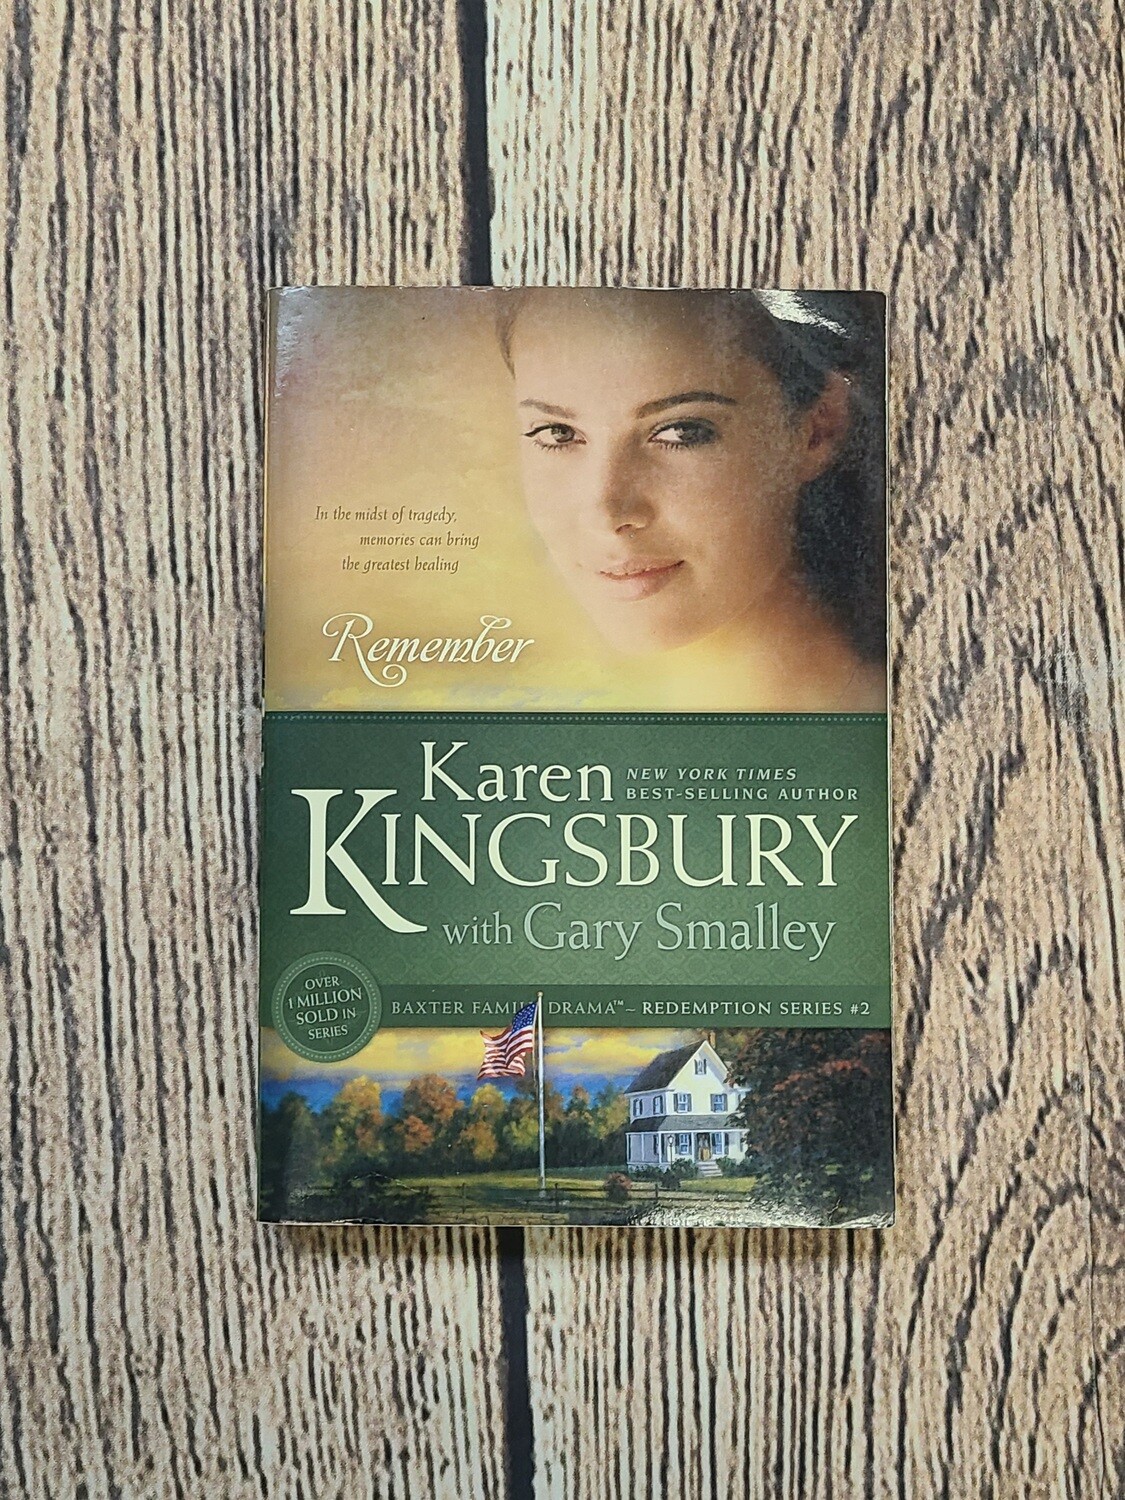 Remember by Karen Kingsbury with Gary Smalley - Paperback - Good Condition